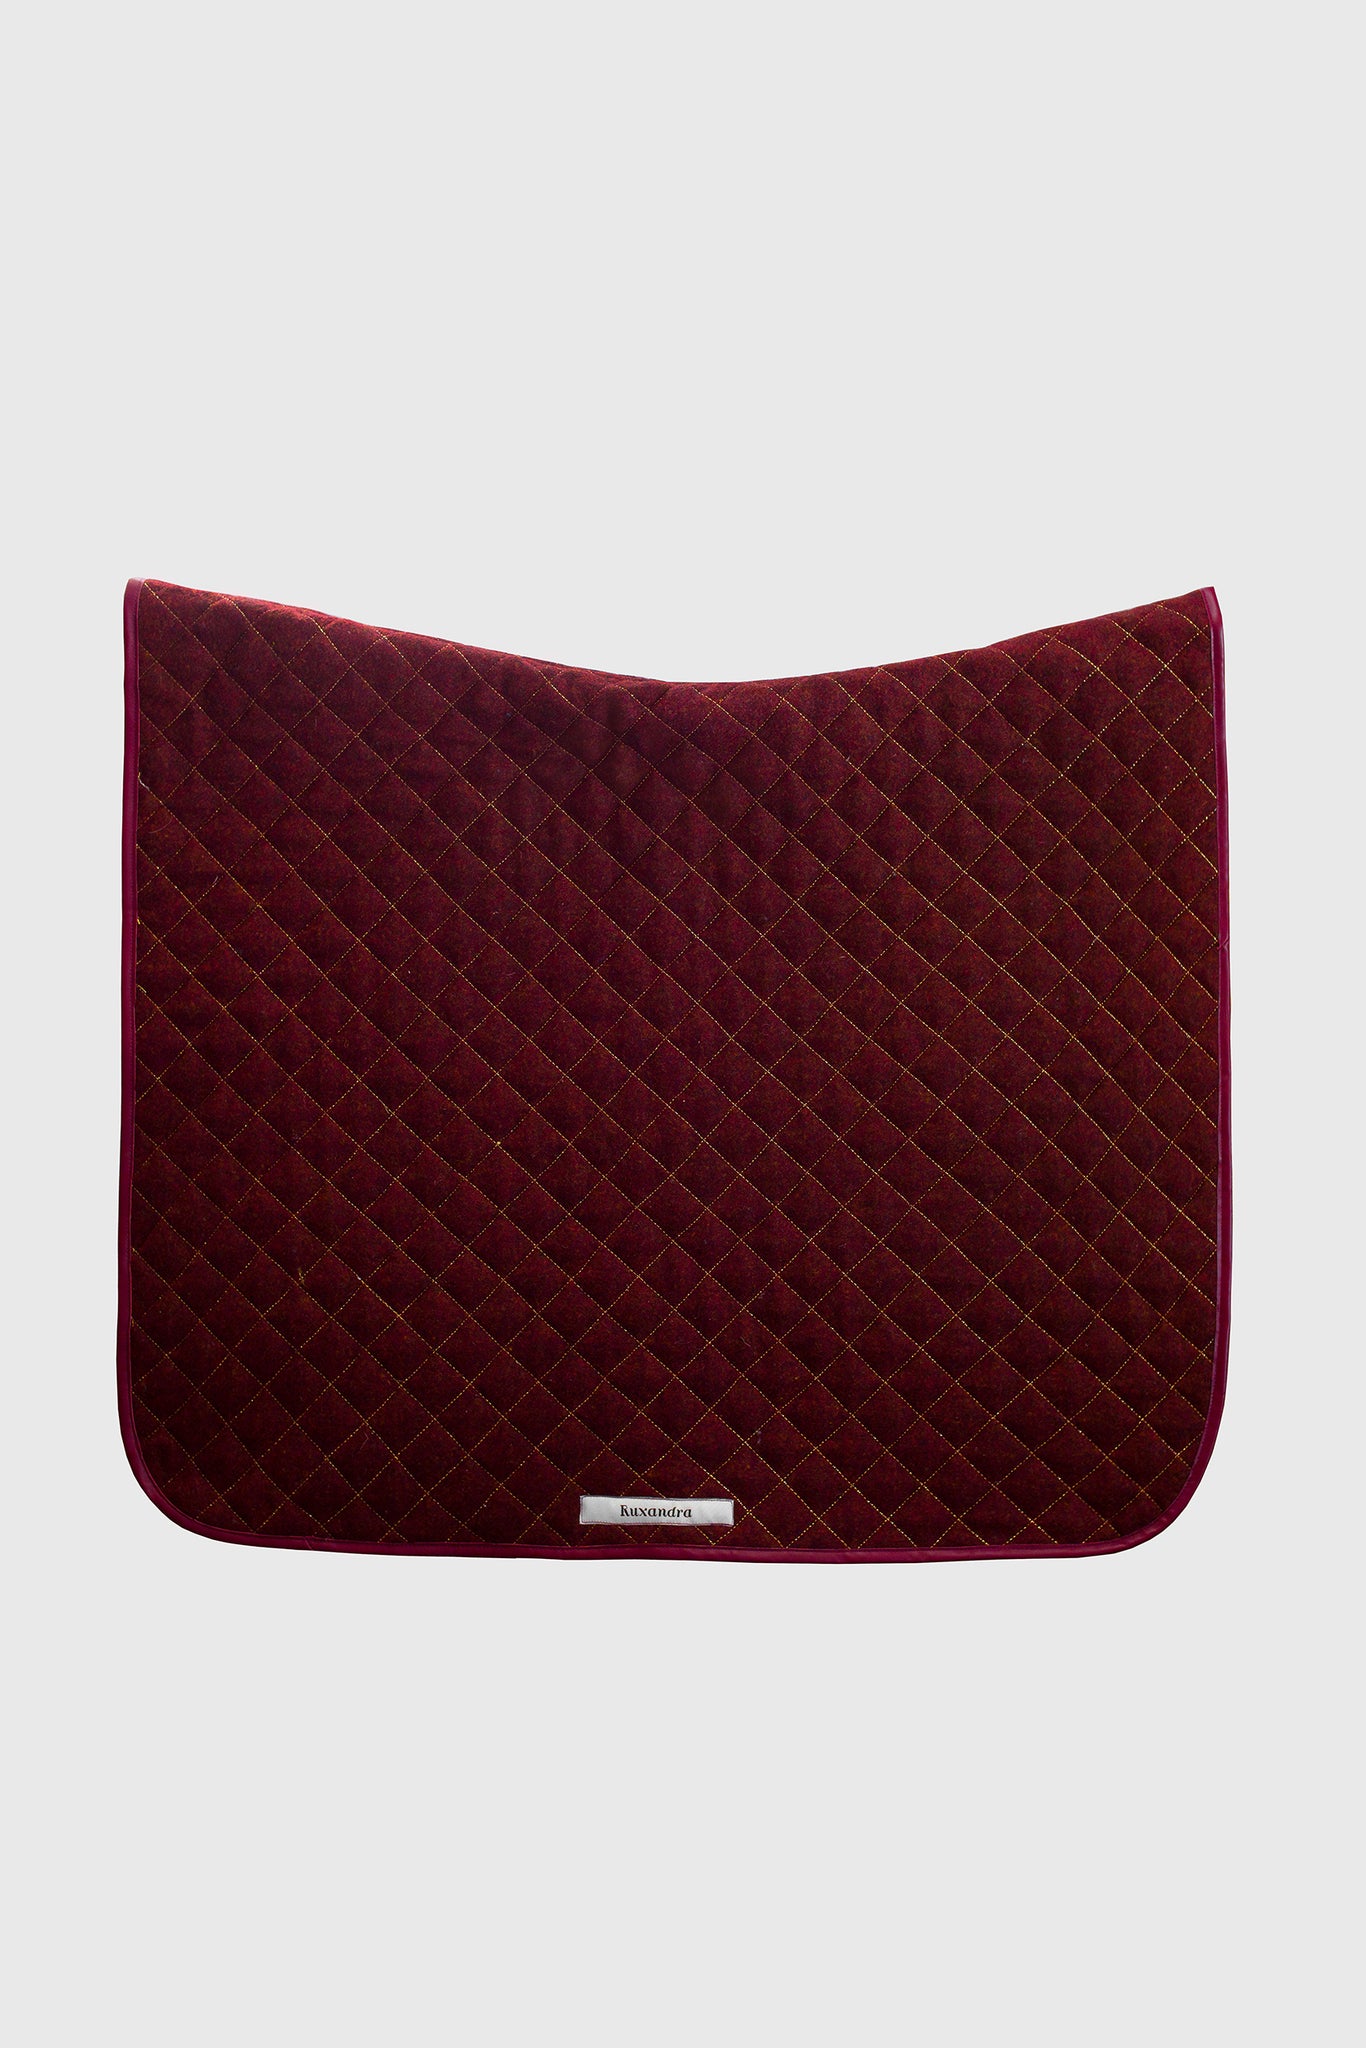 Horse saddle pad, crafted in virgin wool, beautifully chic and elegant, quilted with gold thread, dark blood red color, for horse riding competitions, eventing horse fashion, designed by Ruxandra